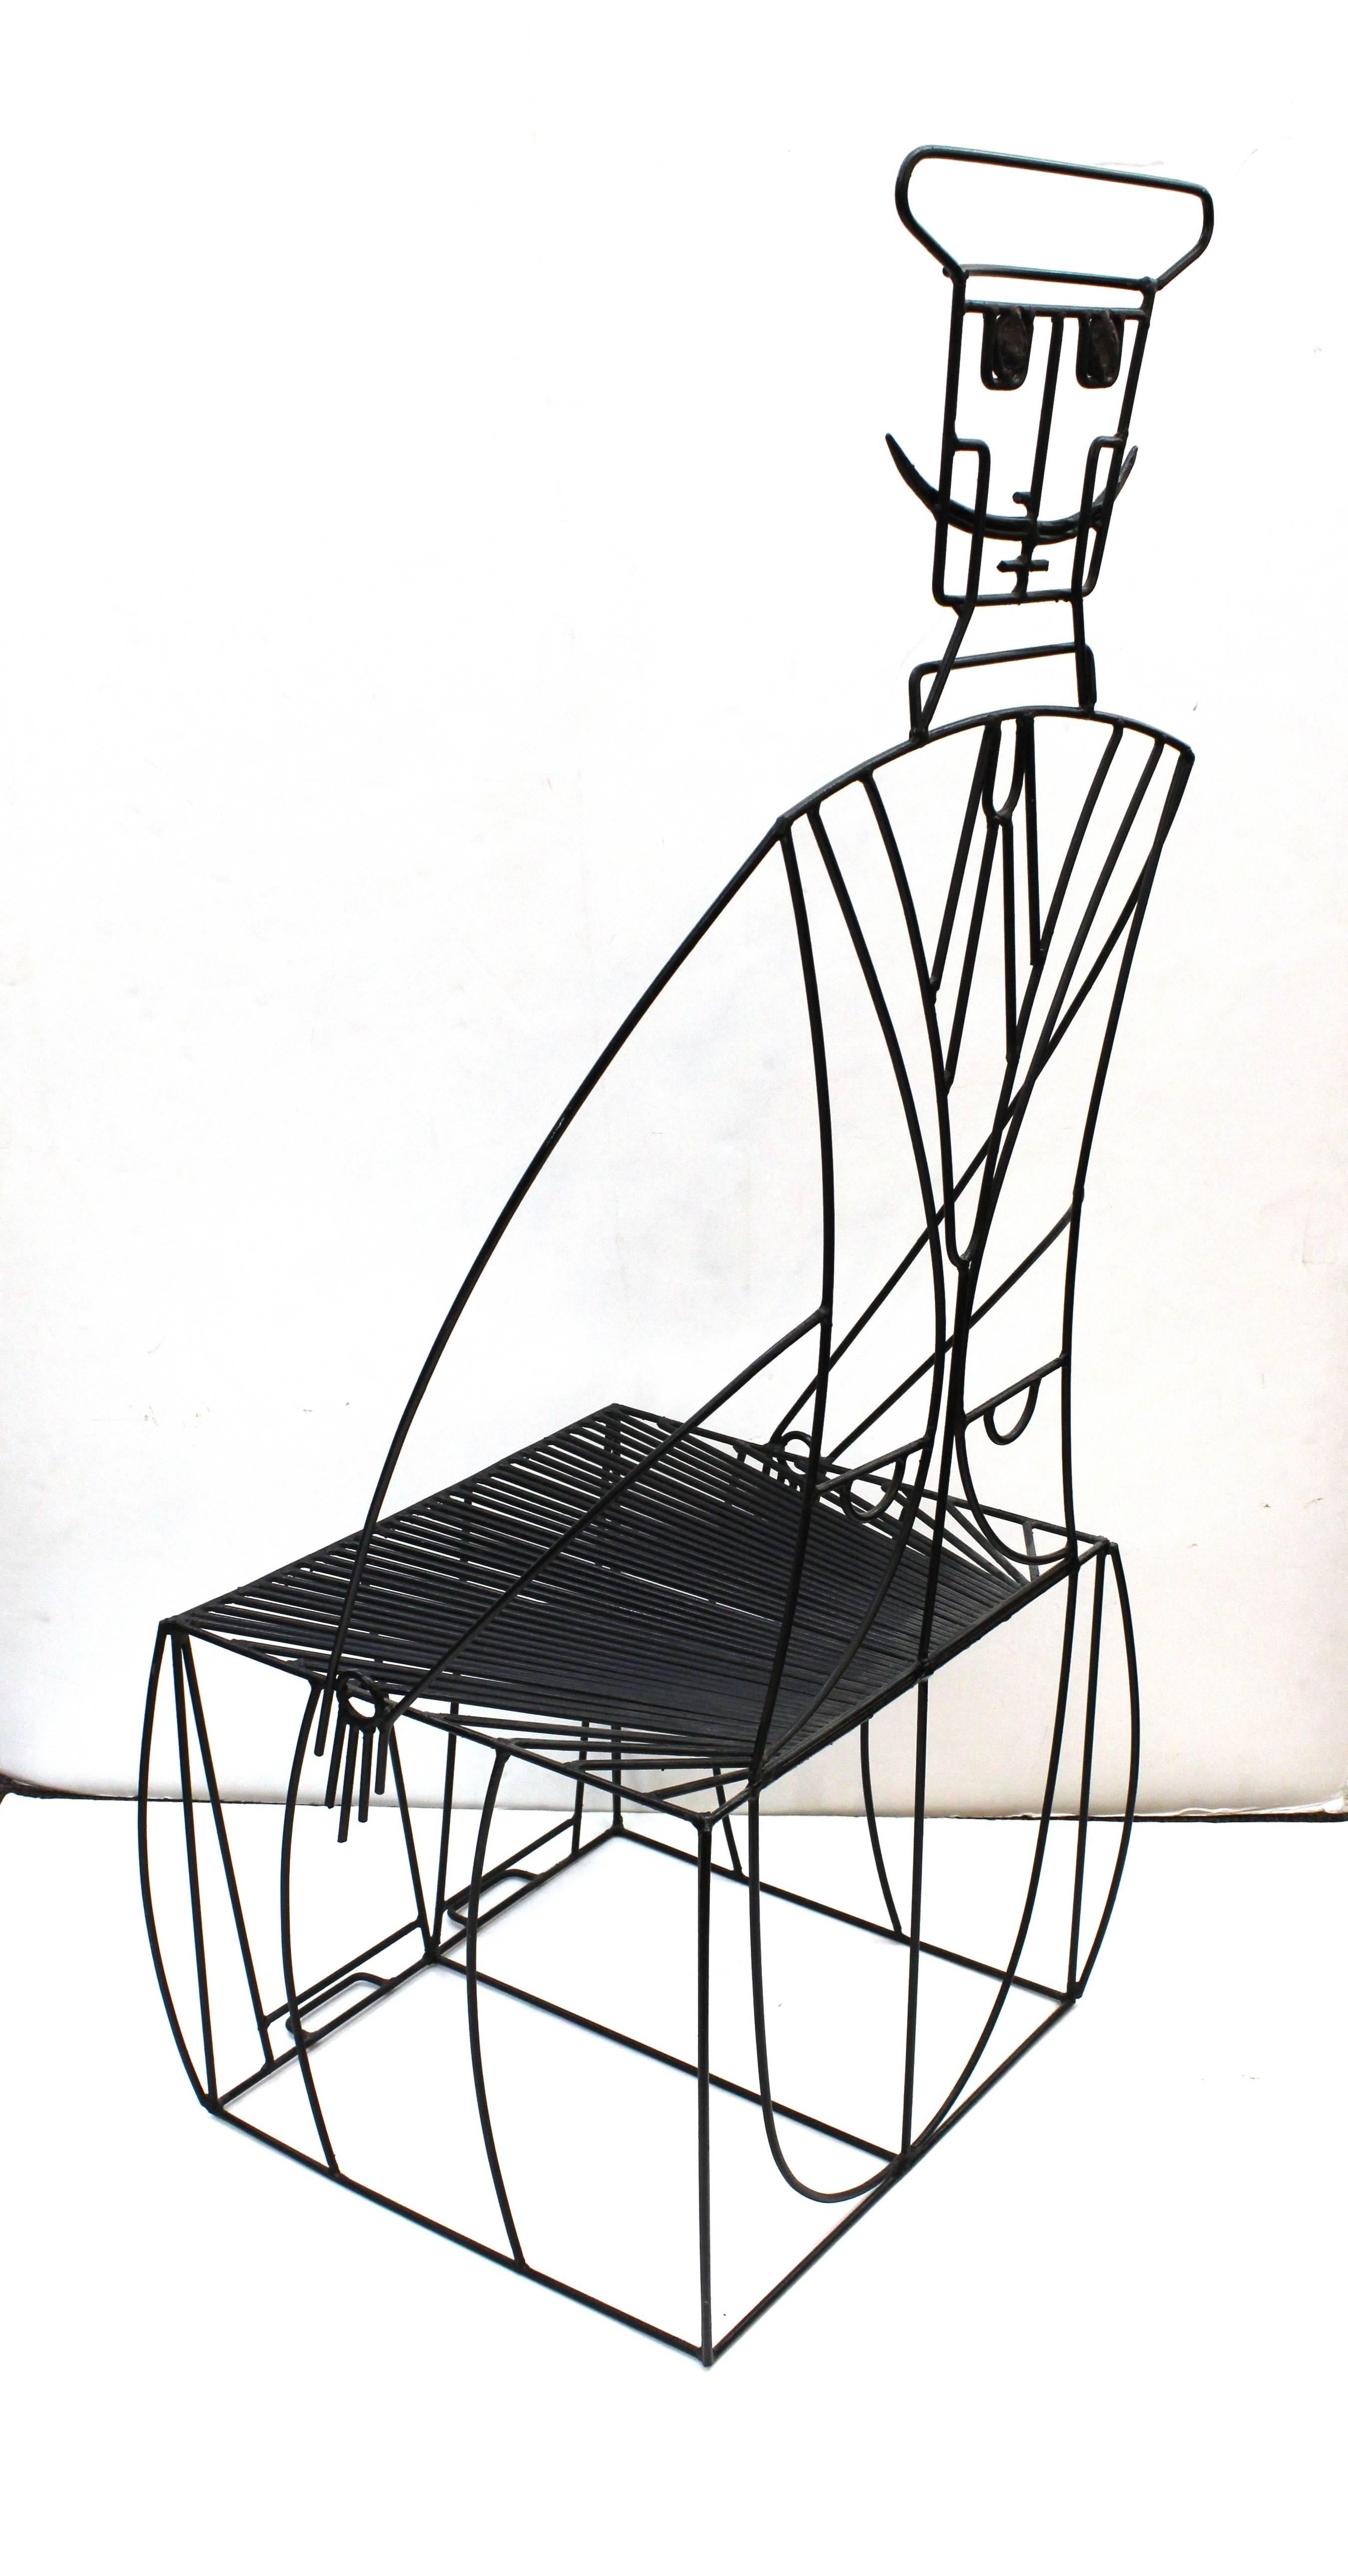 A whimsical chair in the form of a seated man wearing a suit and hat sporting a mustache by John Risley. The chair is entirely in black wrought iron with the man's arms forming the arms of the chair. In very good condition.